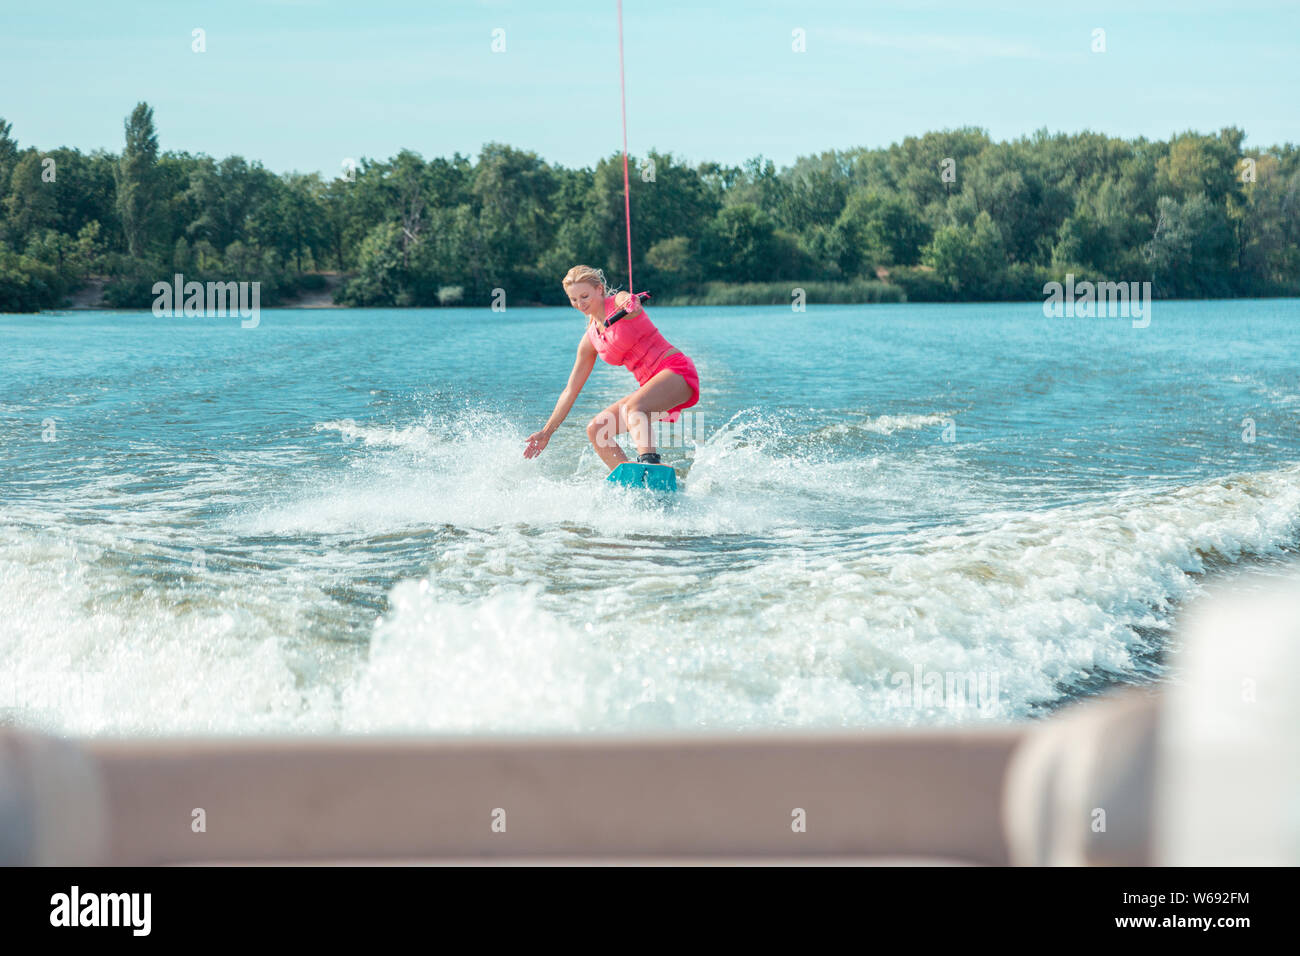 Sporty woman riding a wakeboard and performing tricks Stock Photo